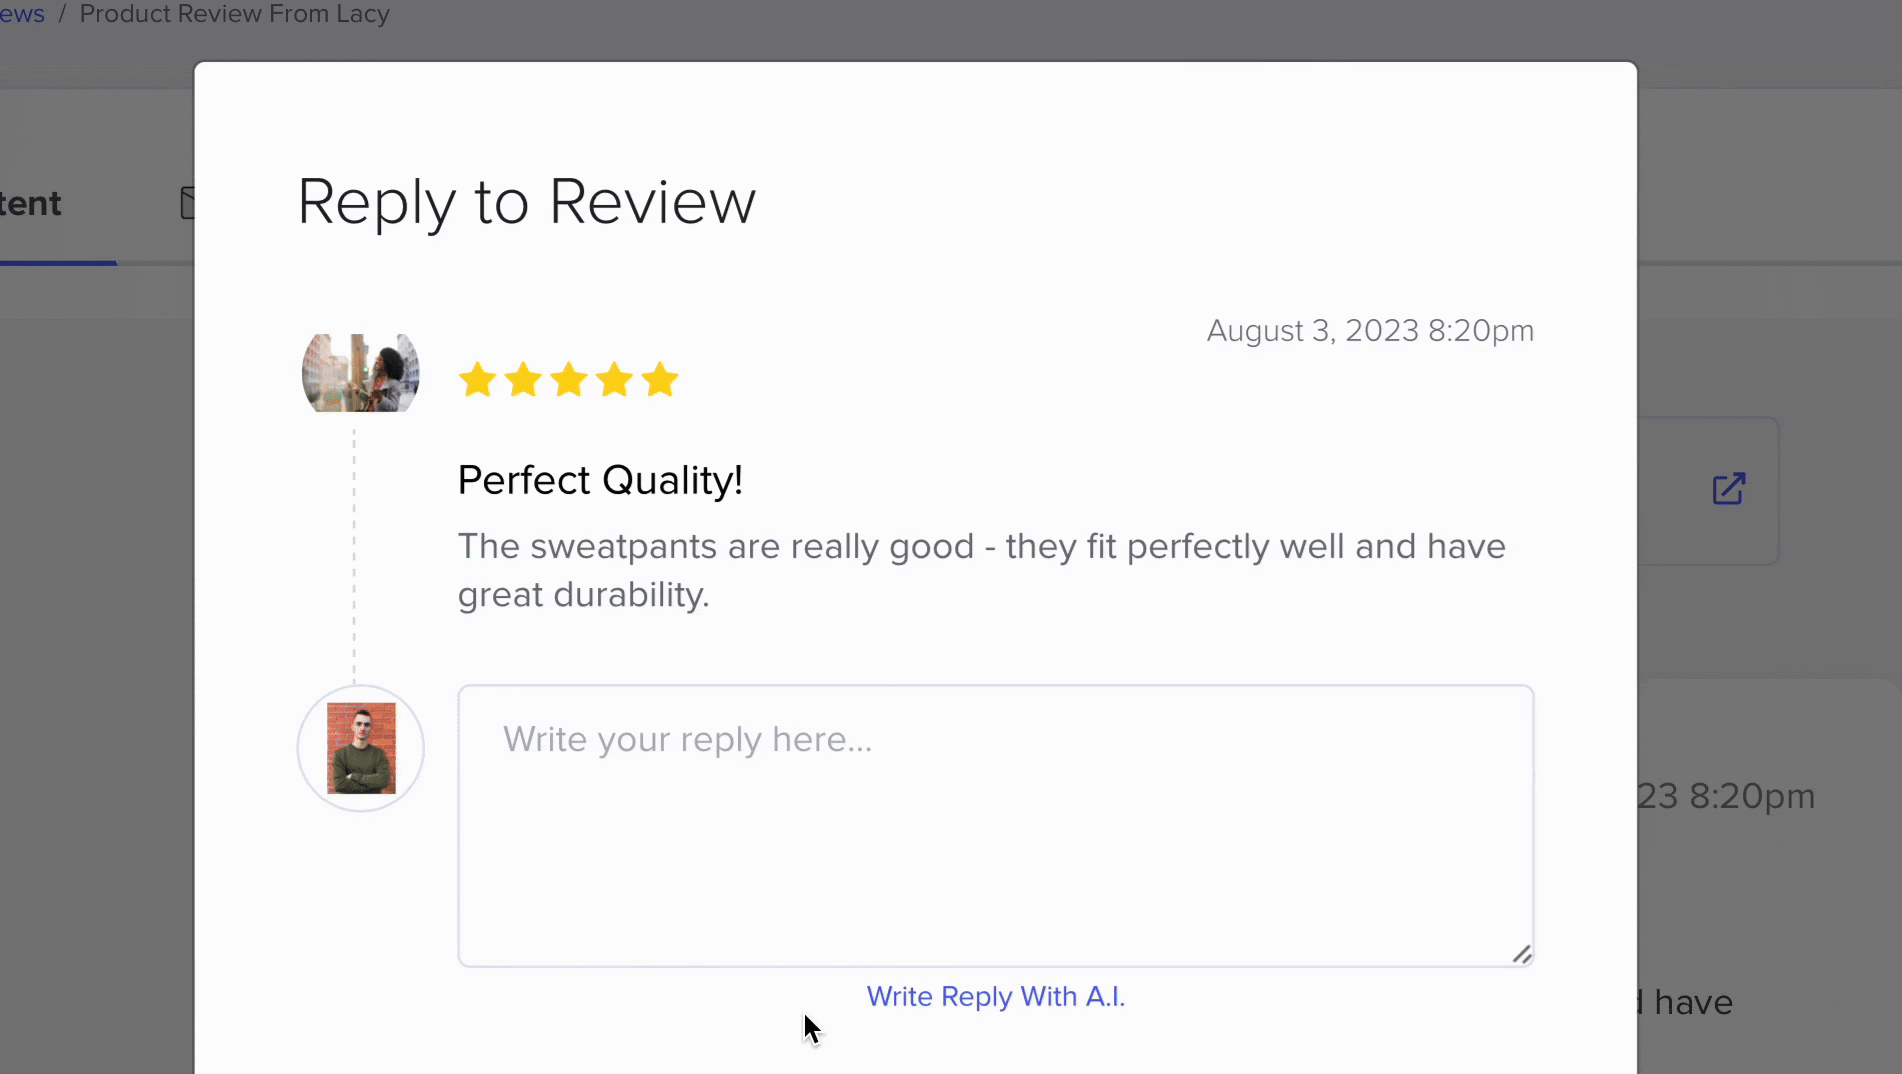 Let A.I. Write Your Review Replies